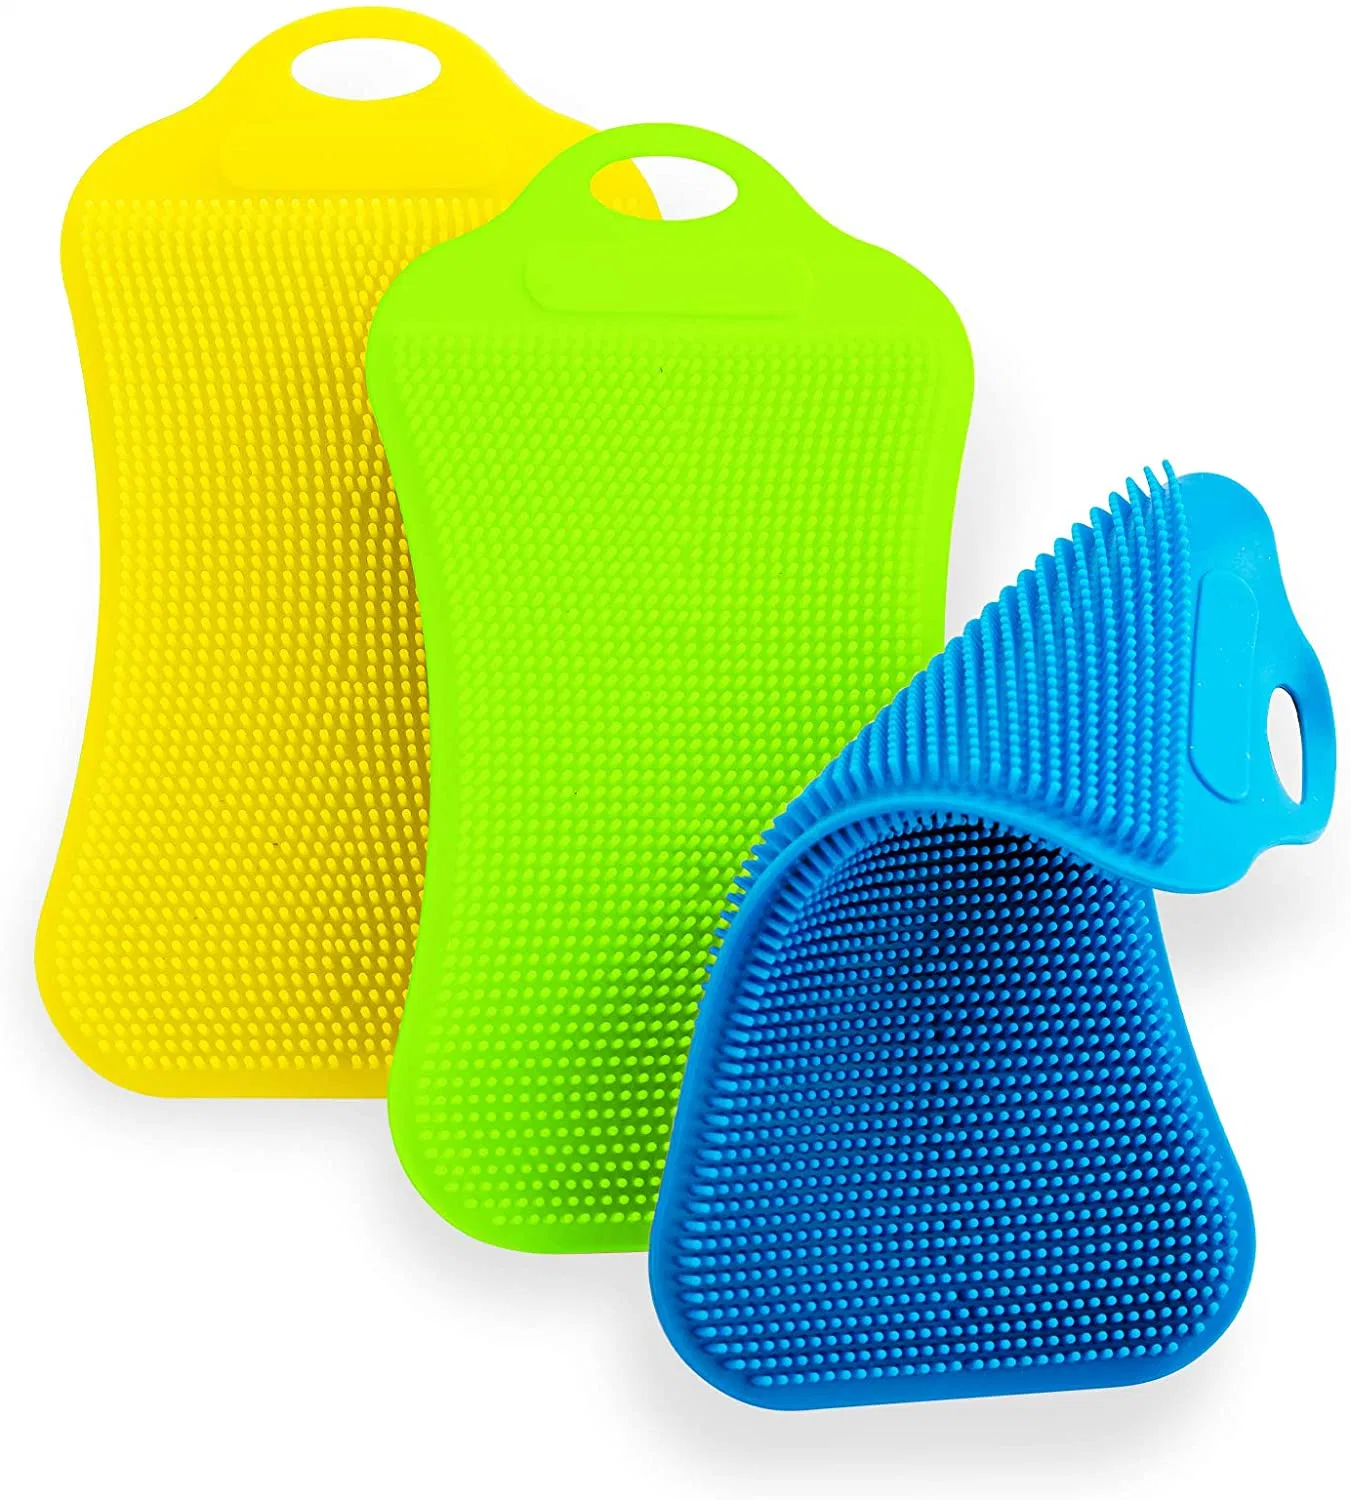 Double-Side Silicone Sponges for Dishes, Pots, Vegetables and Fruits, BPA Free Premiul Kitchen Gadgets